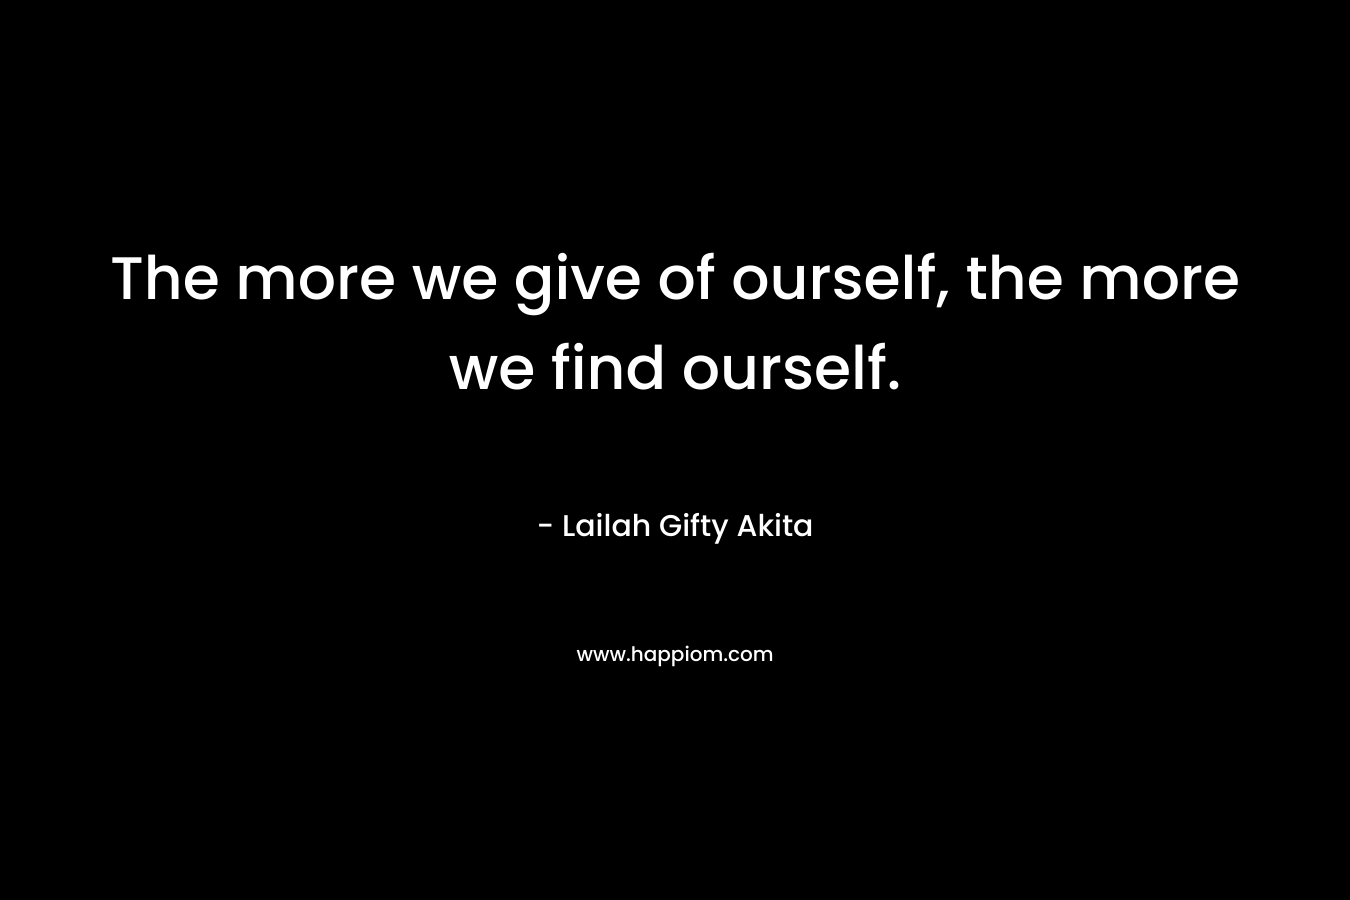 The more we give of ourself, the more we find ourself.